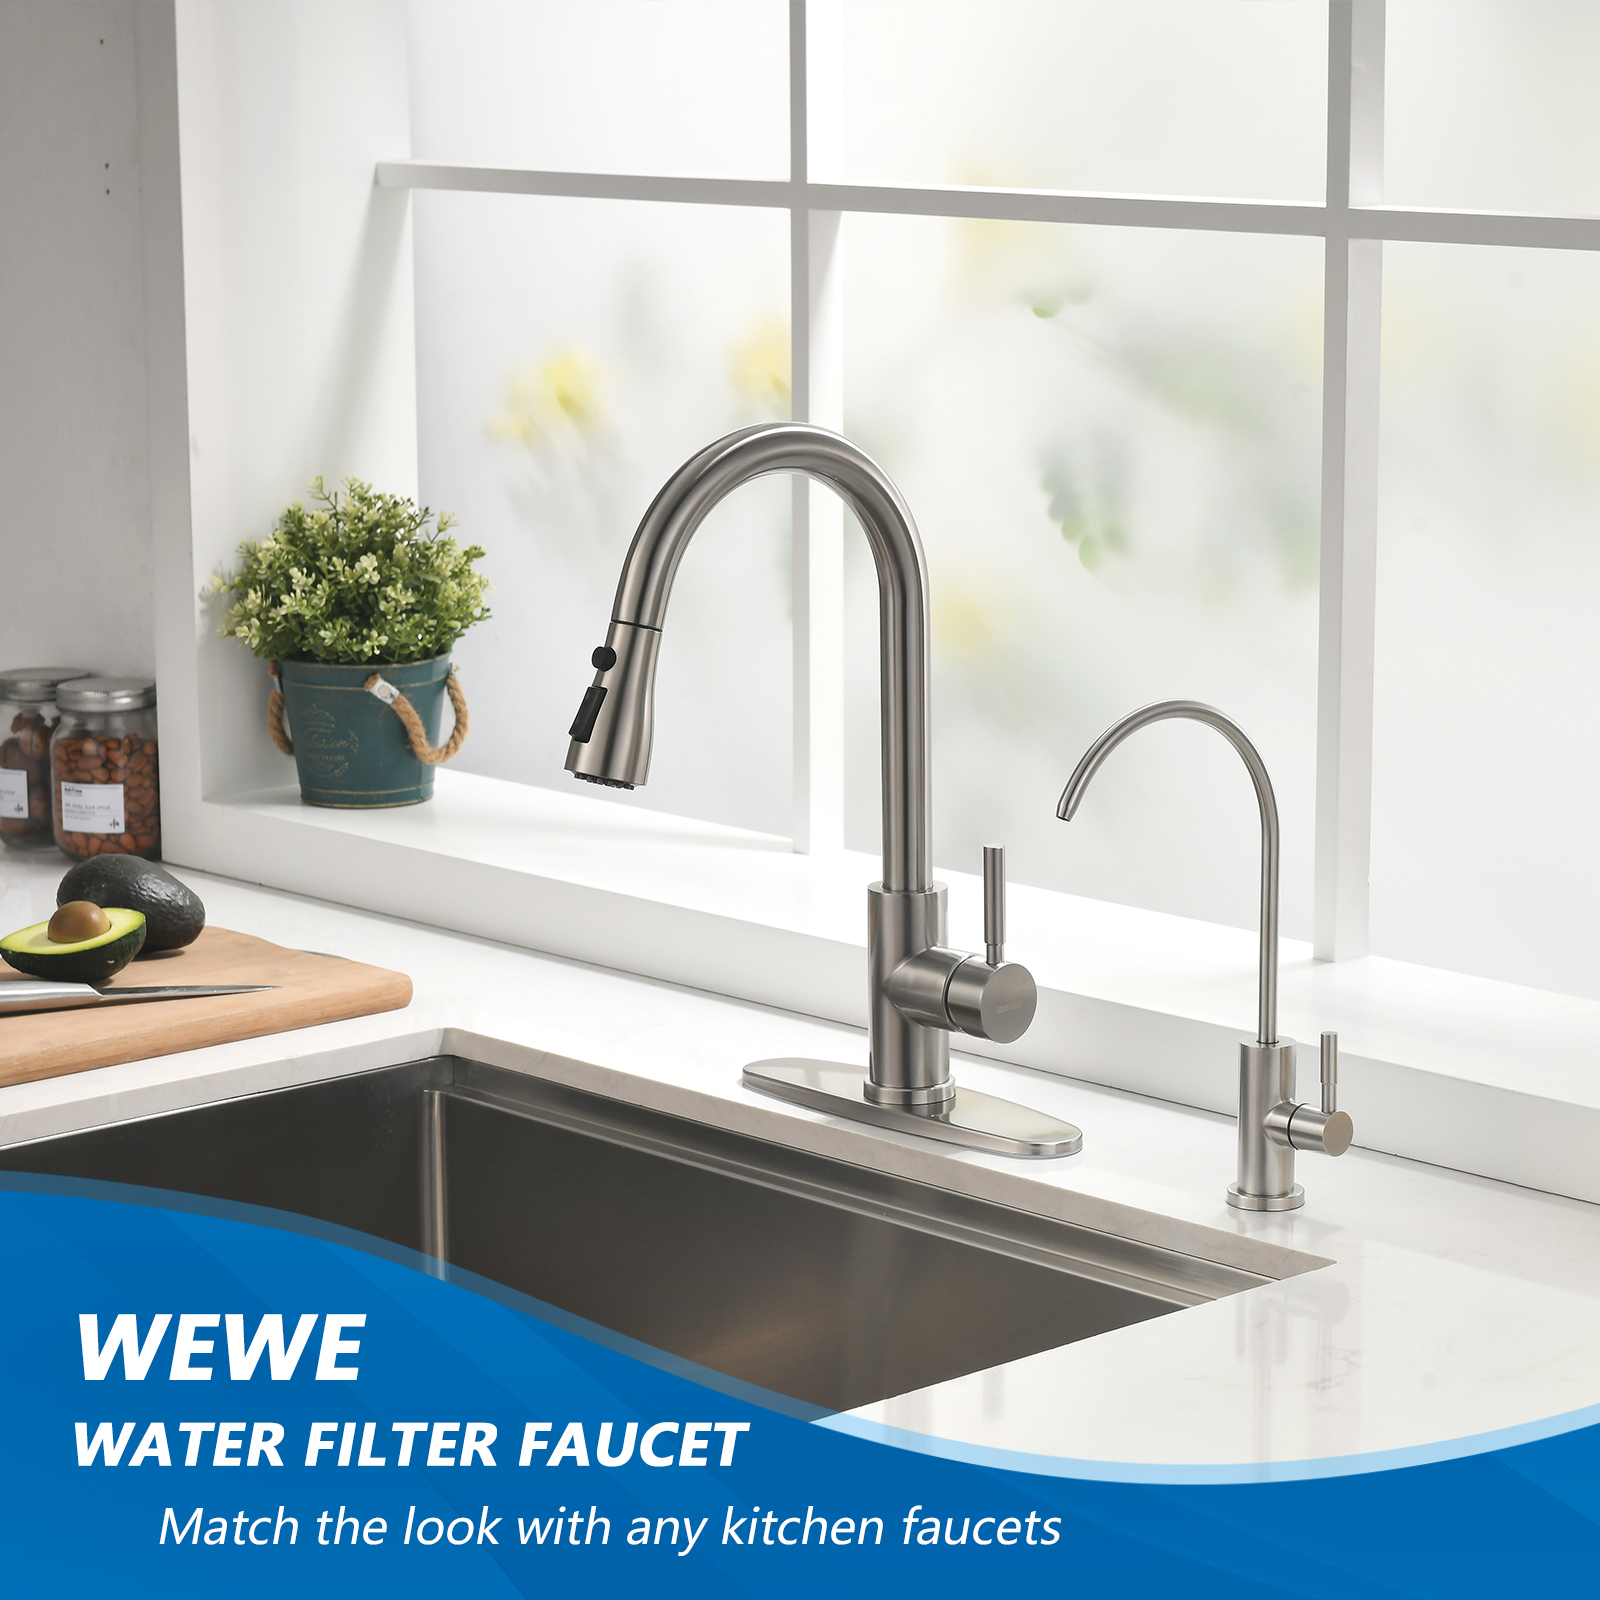 WEWE Drinking Water Faucet for Kitchen Sink, Kitchen Water Filter Faucet  Stainless Steel for Reverse Osmosis or Water Filtration System Beverage